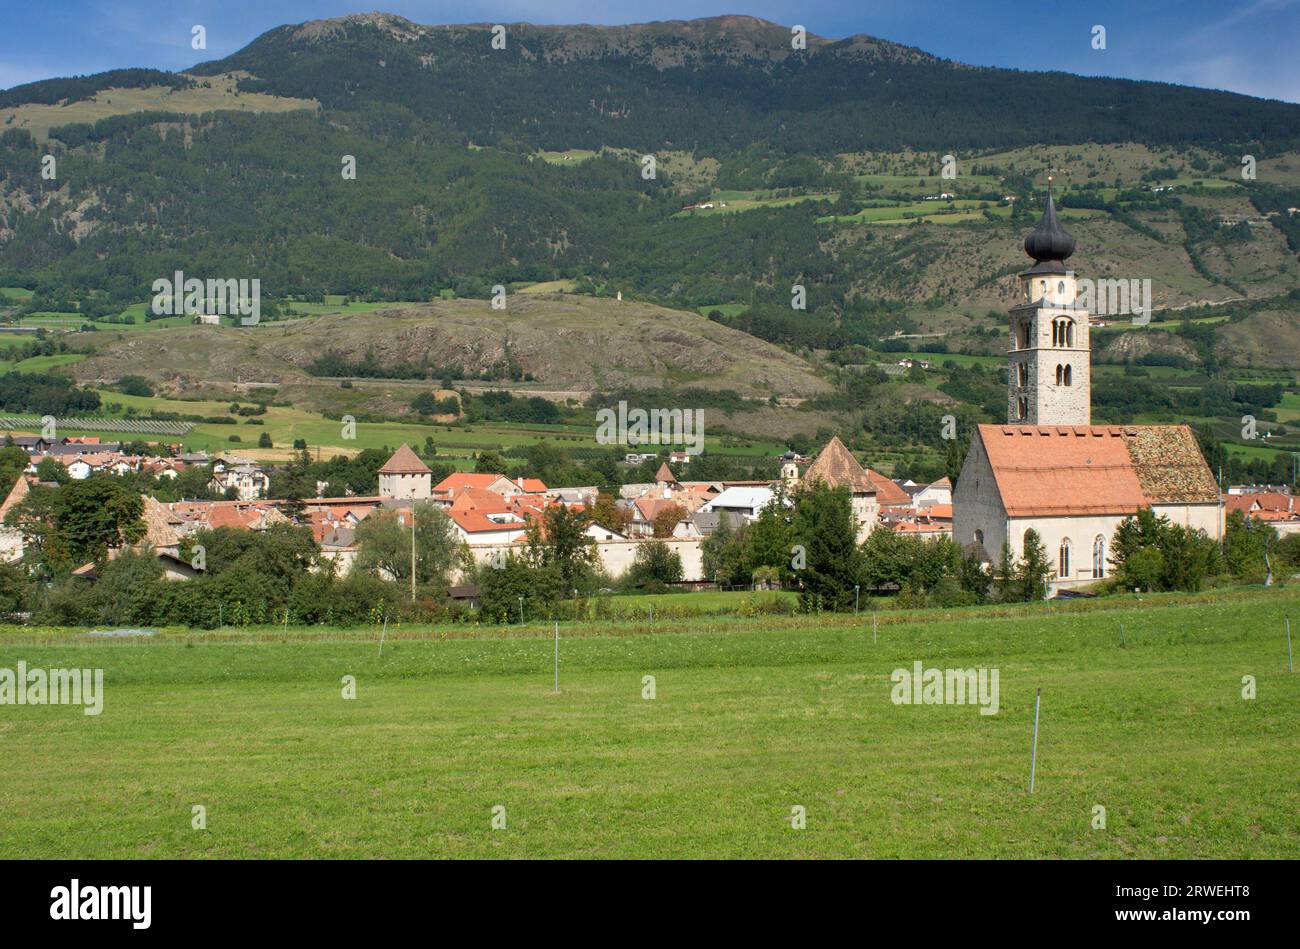 The town of Glurns in the Vinschgau Valley Stock Photo